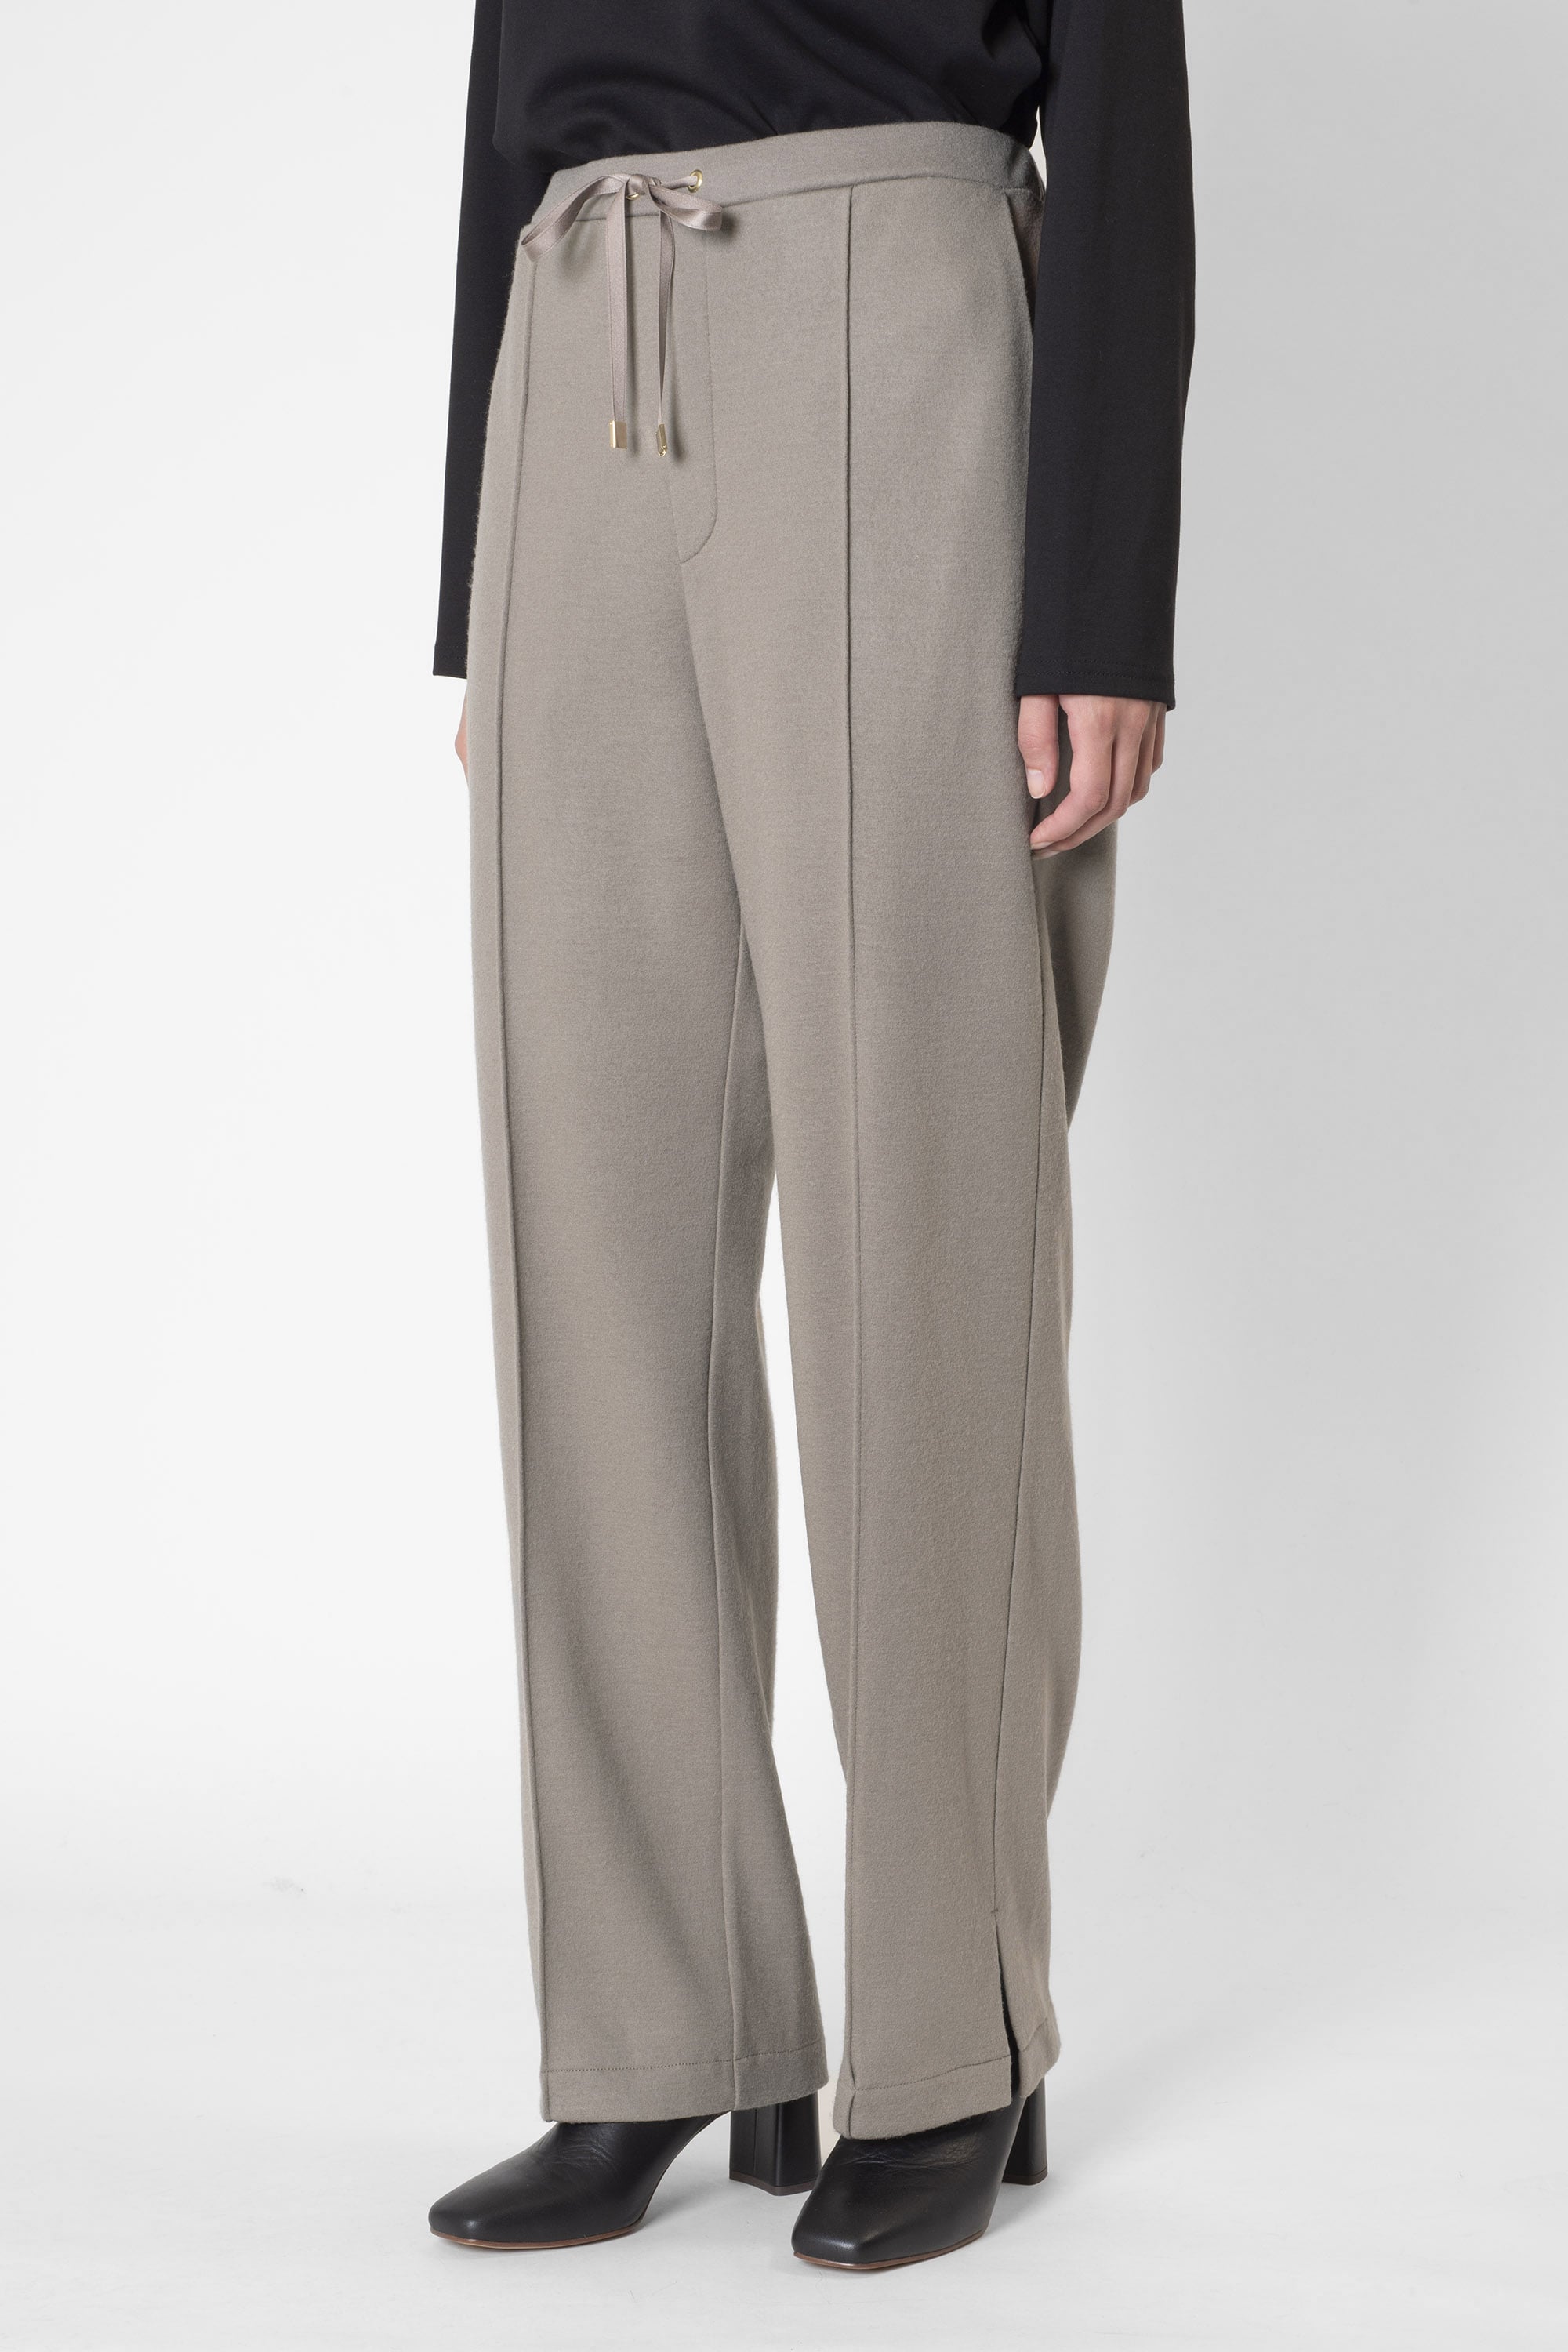 WOOL JERSEY CENTER PRESSED PANTS